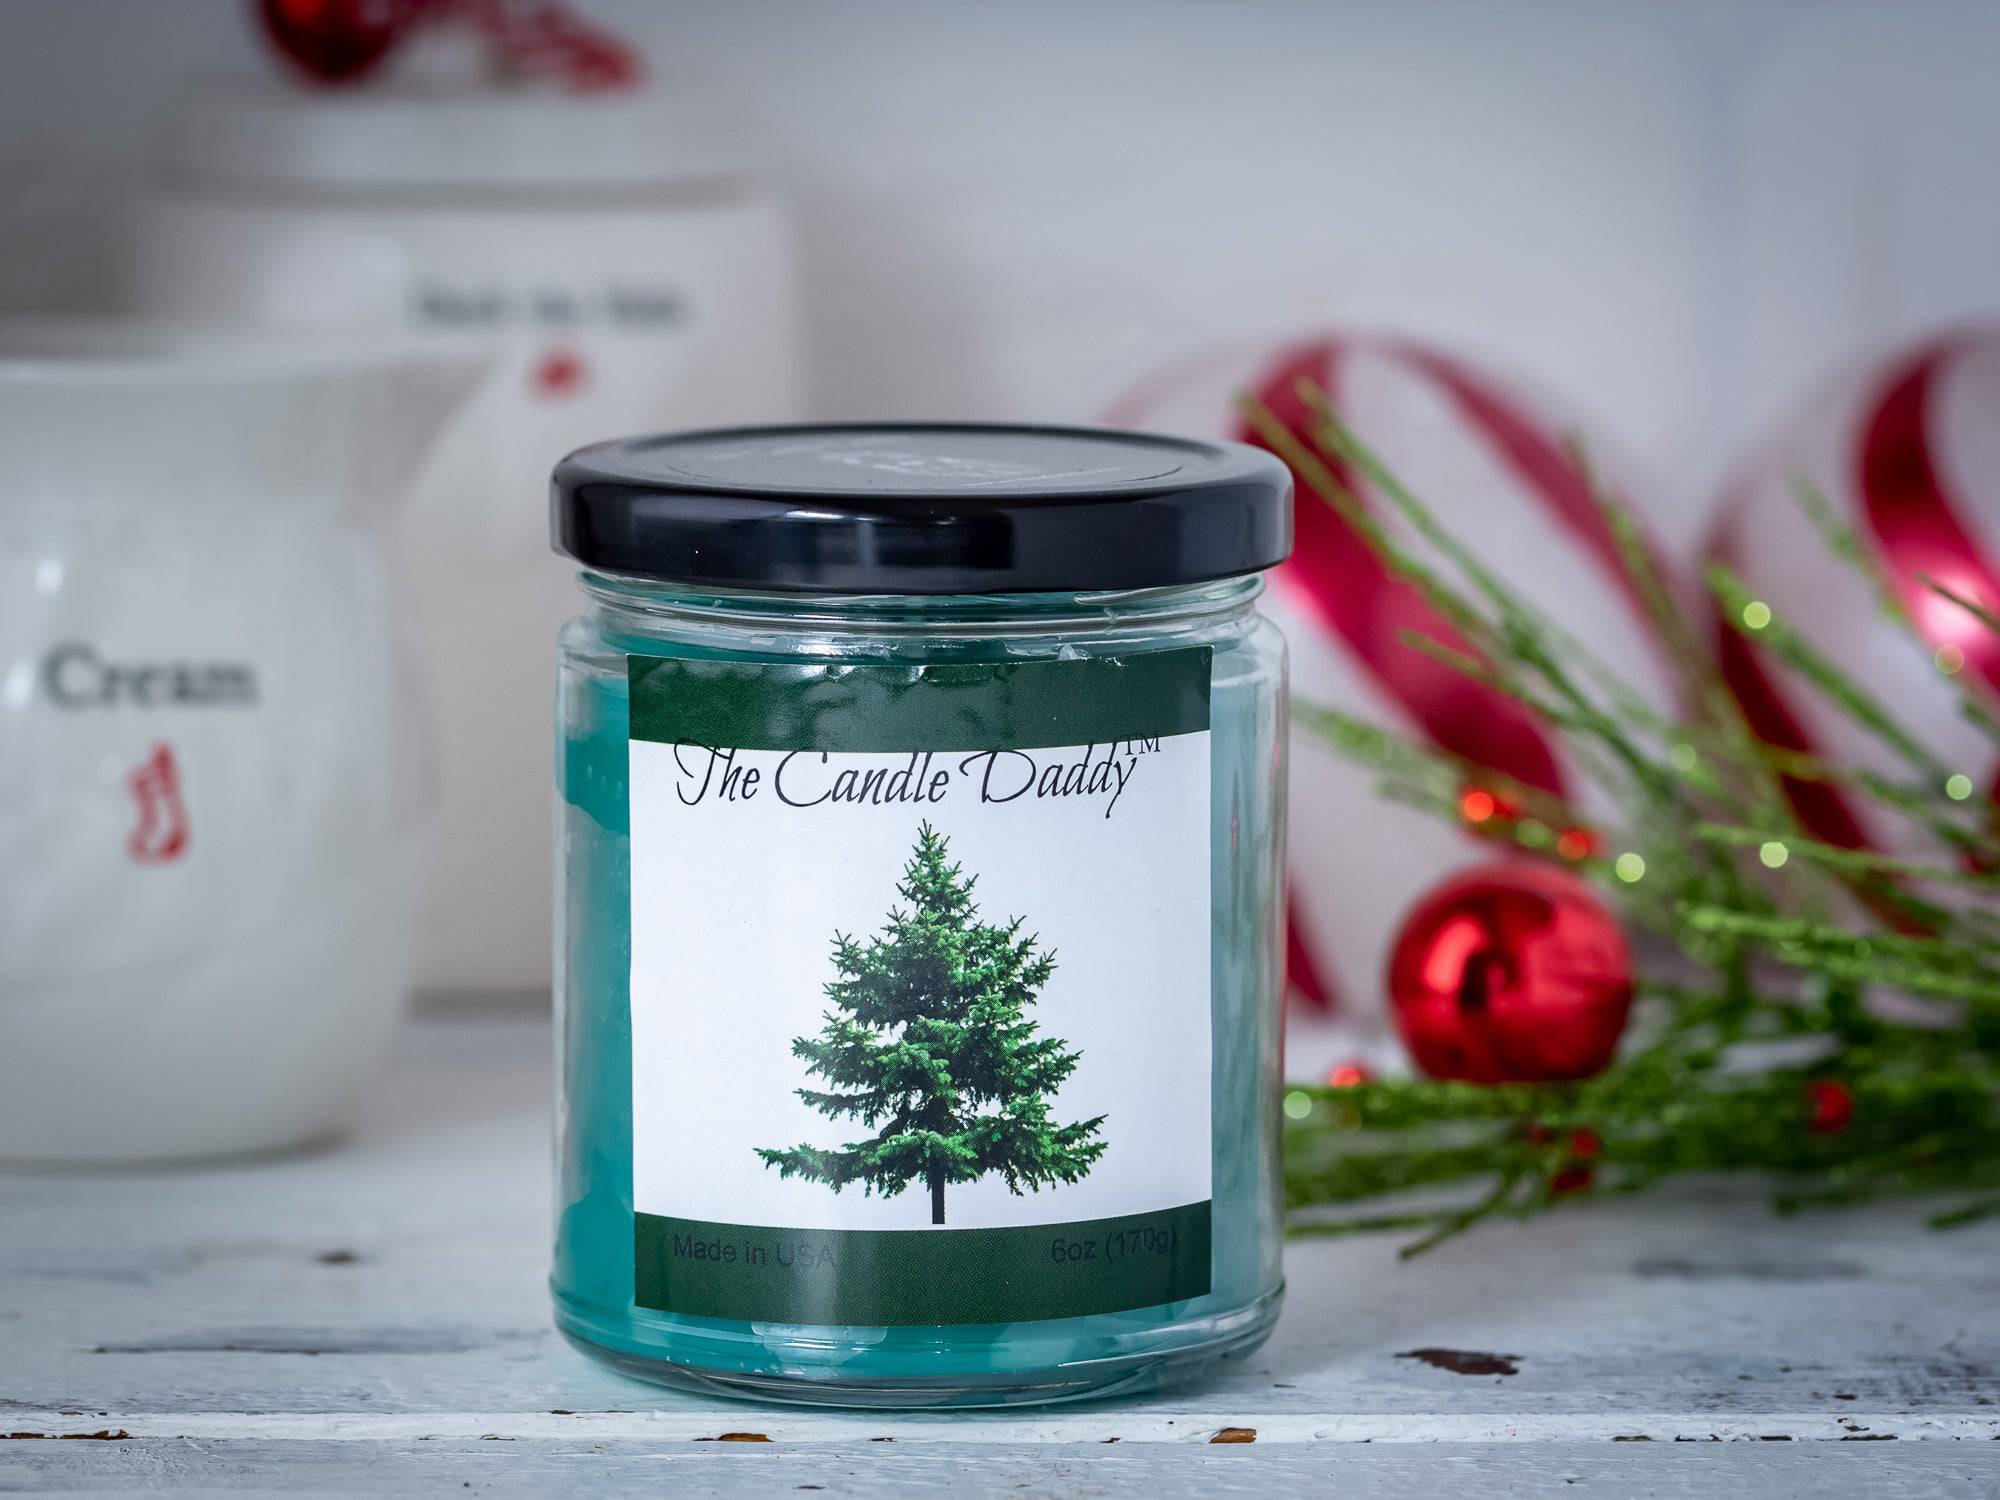 Pine Tree Christmas Holiday Candle - Funny Blue Spruce Pine Tree